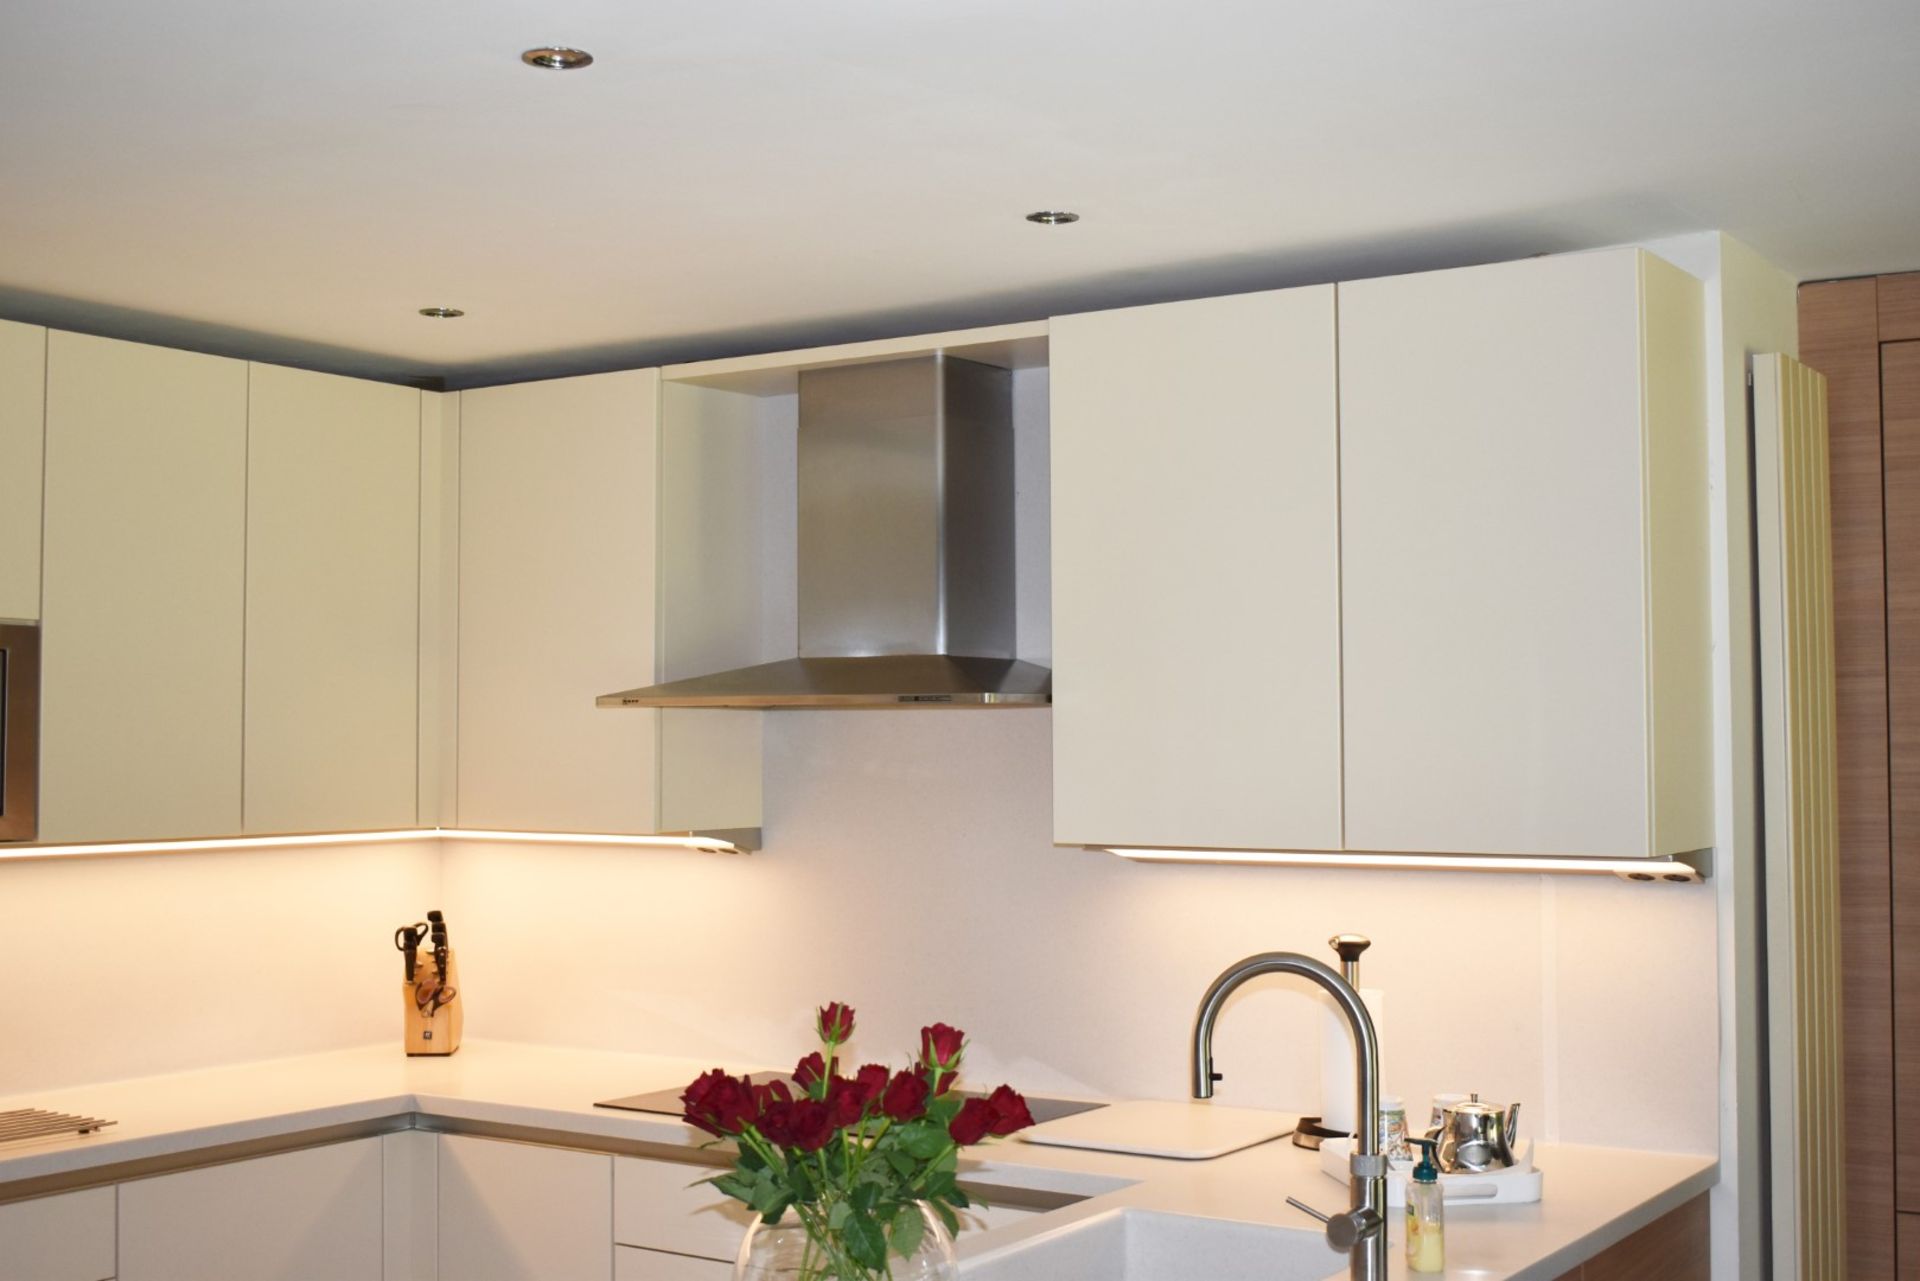 1 x Contemporary SieMatic Fitted Kitchen With Corian Work Surfaces and Integrated Appliances - Image 7 of 70